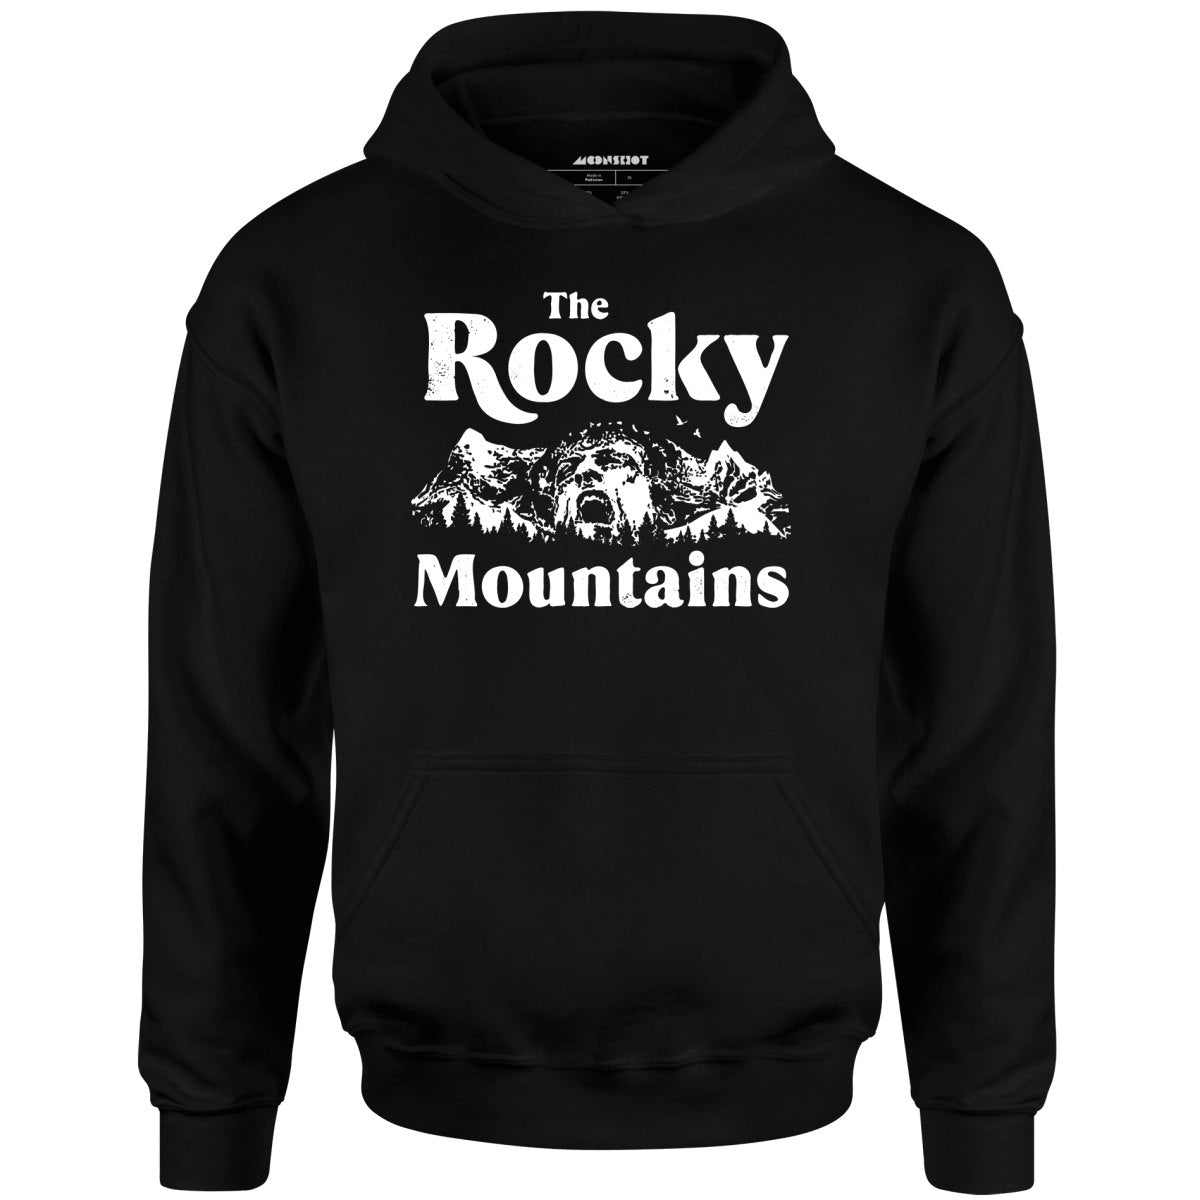 The Rocky Mountains - Unisex Hoodie